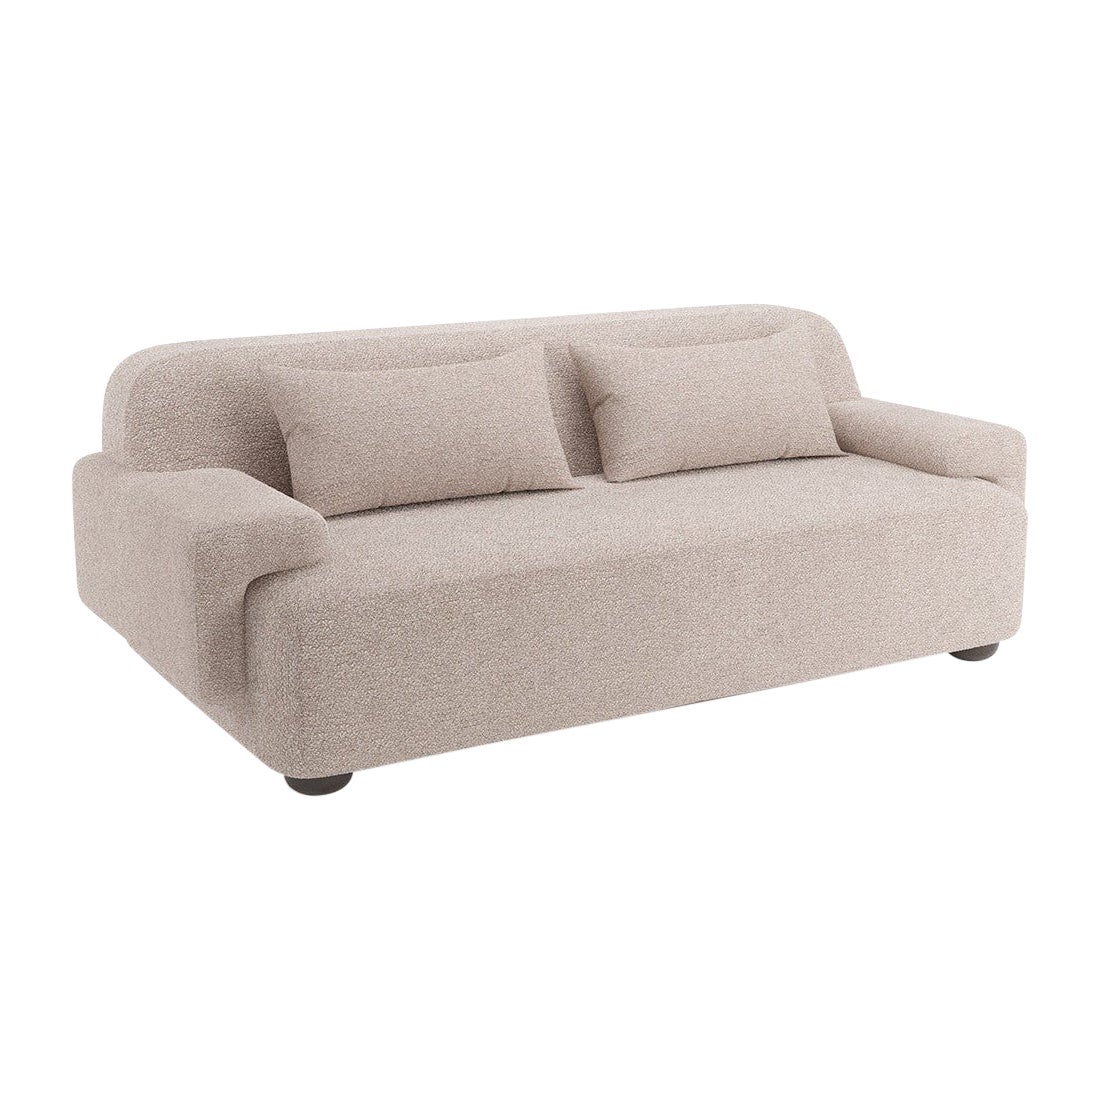 Popus Editions Lena 3 Seater Sofa in Mole Taupe Malmoe Terry Upholstery For Sale